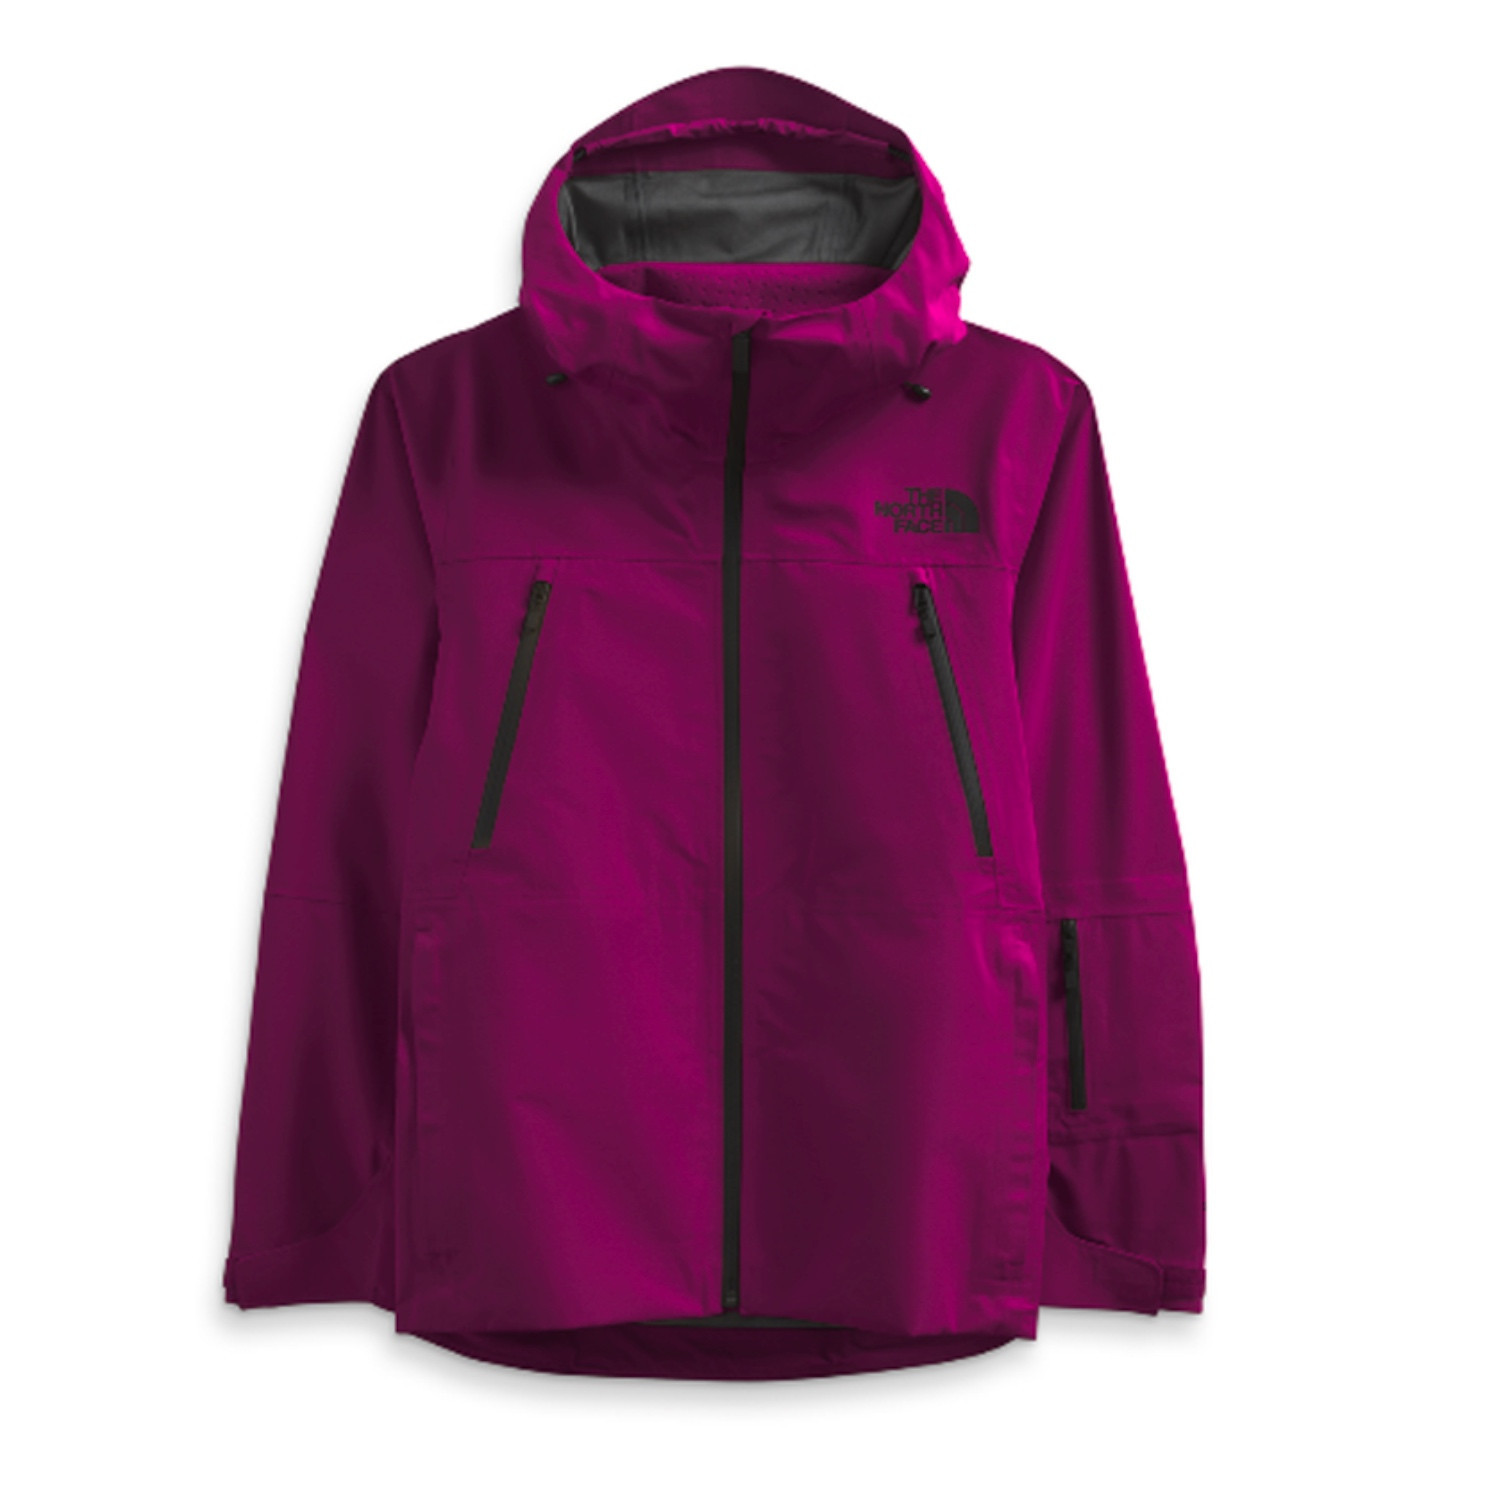 The North Face Ceptor Jacket // Women's